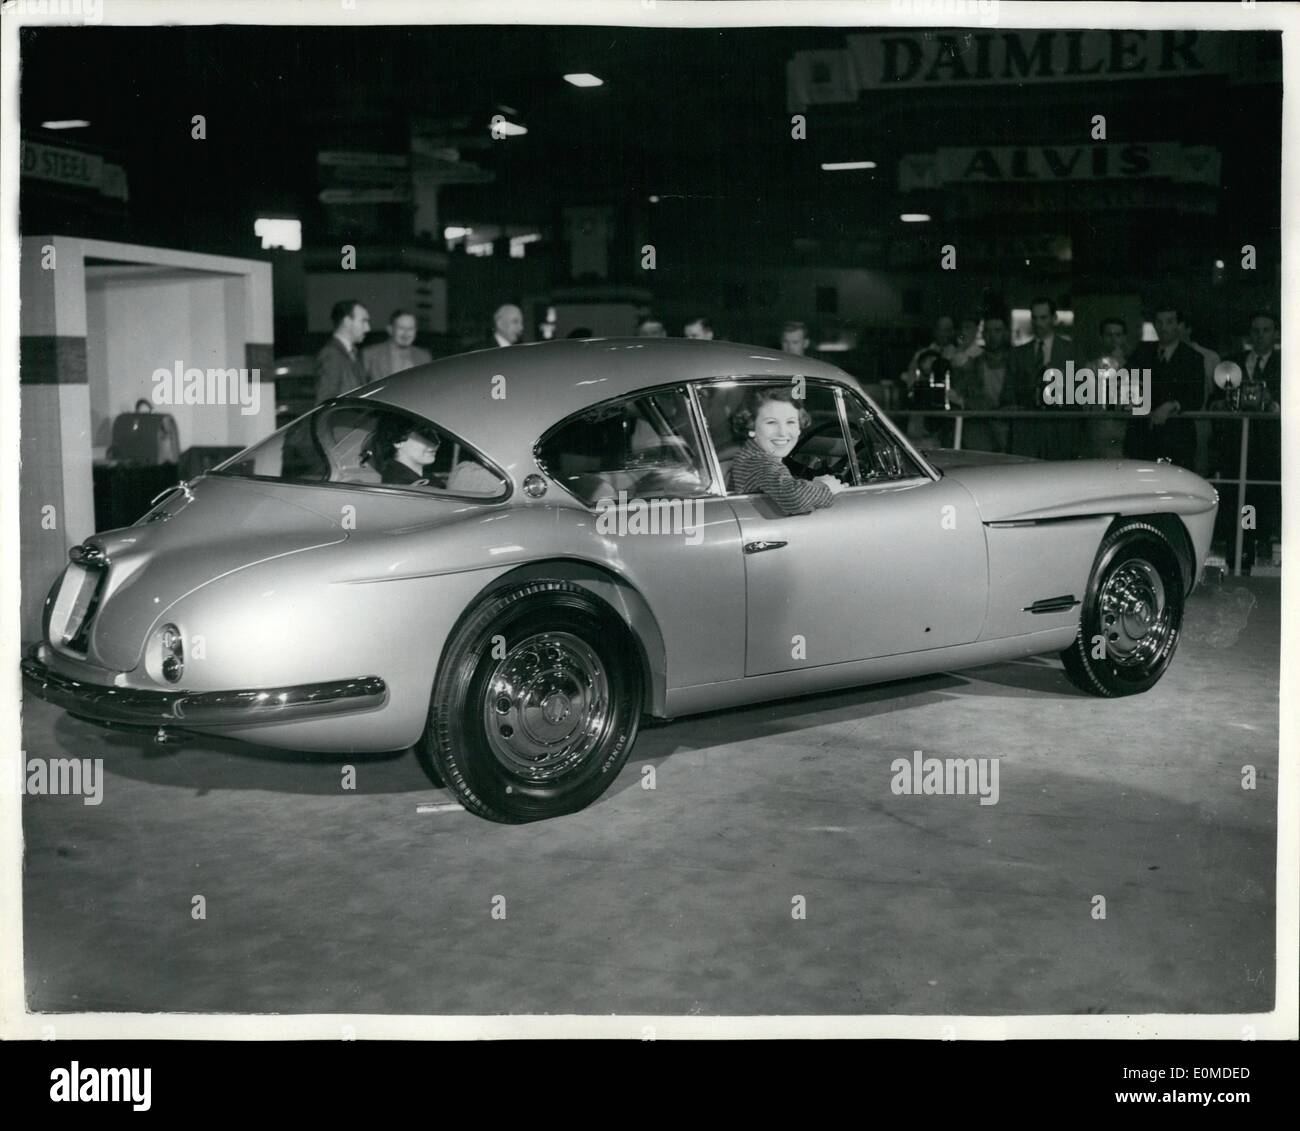 Oct. 10, 1954 - Pre-View Of International Motor Show The Jensen 541 Plastic Saloon: Photo Shows Rear view of the Jensen 541 100 Stock Photo